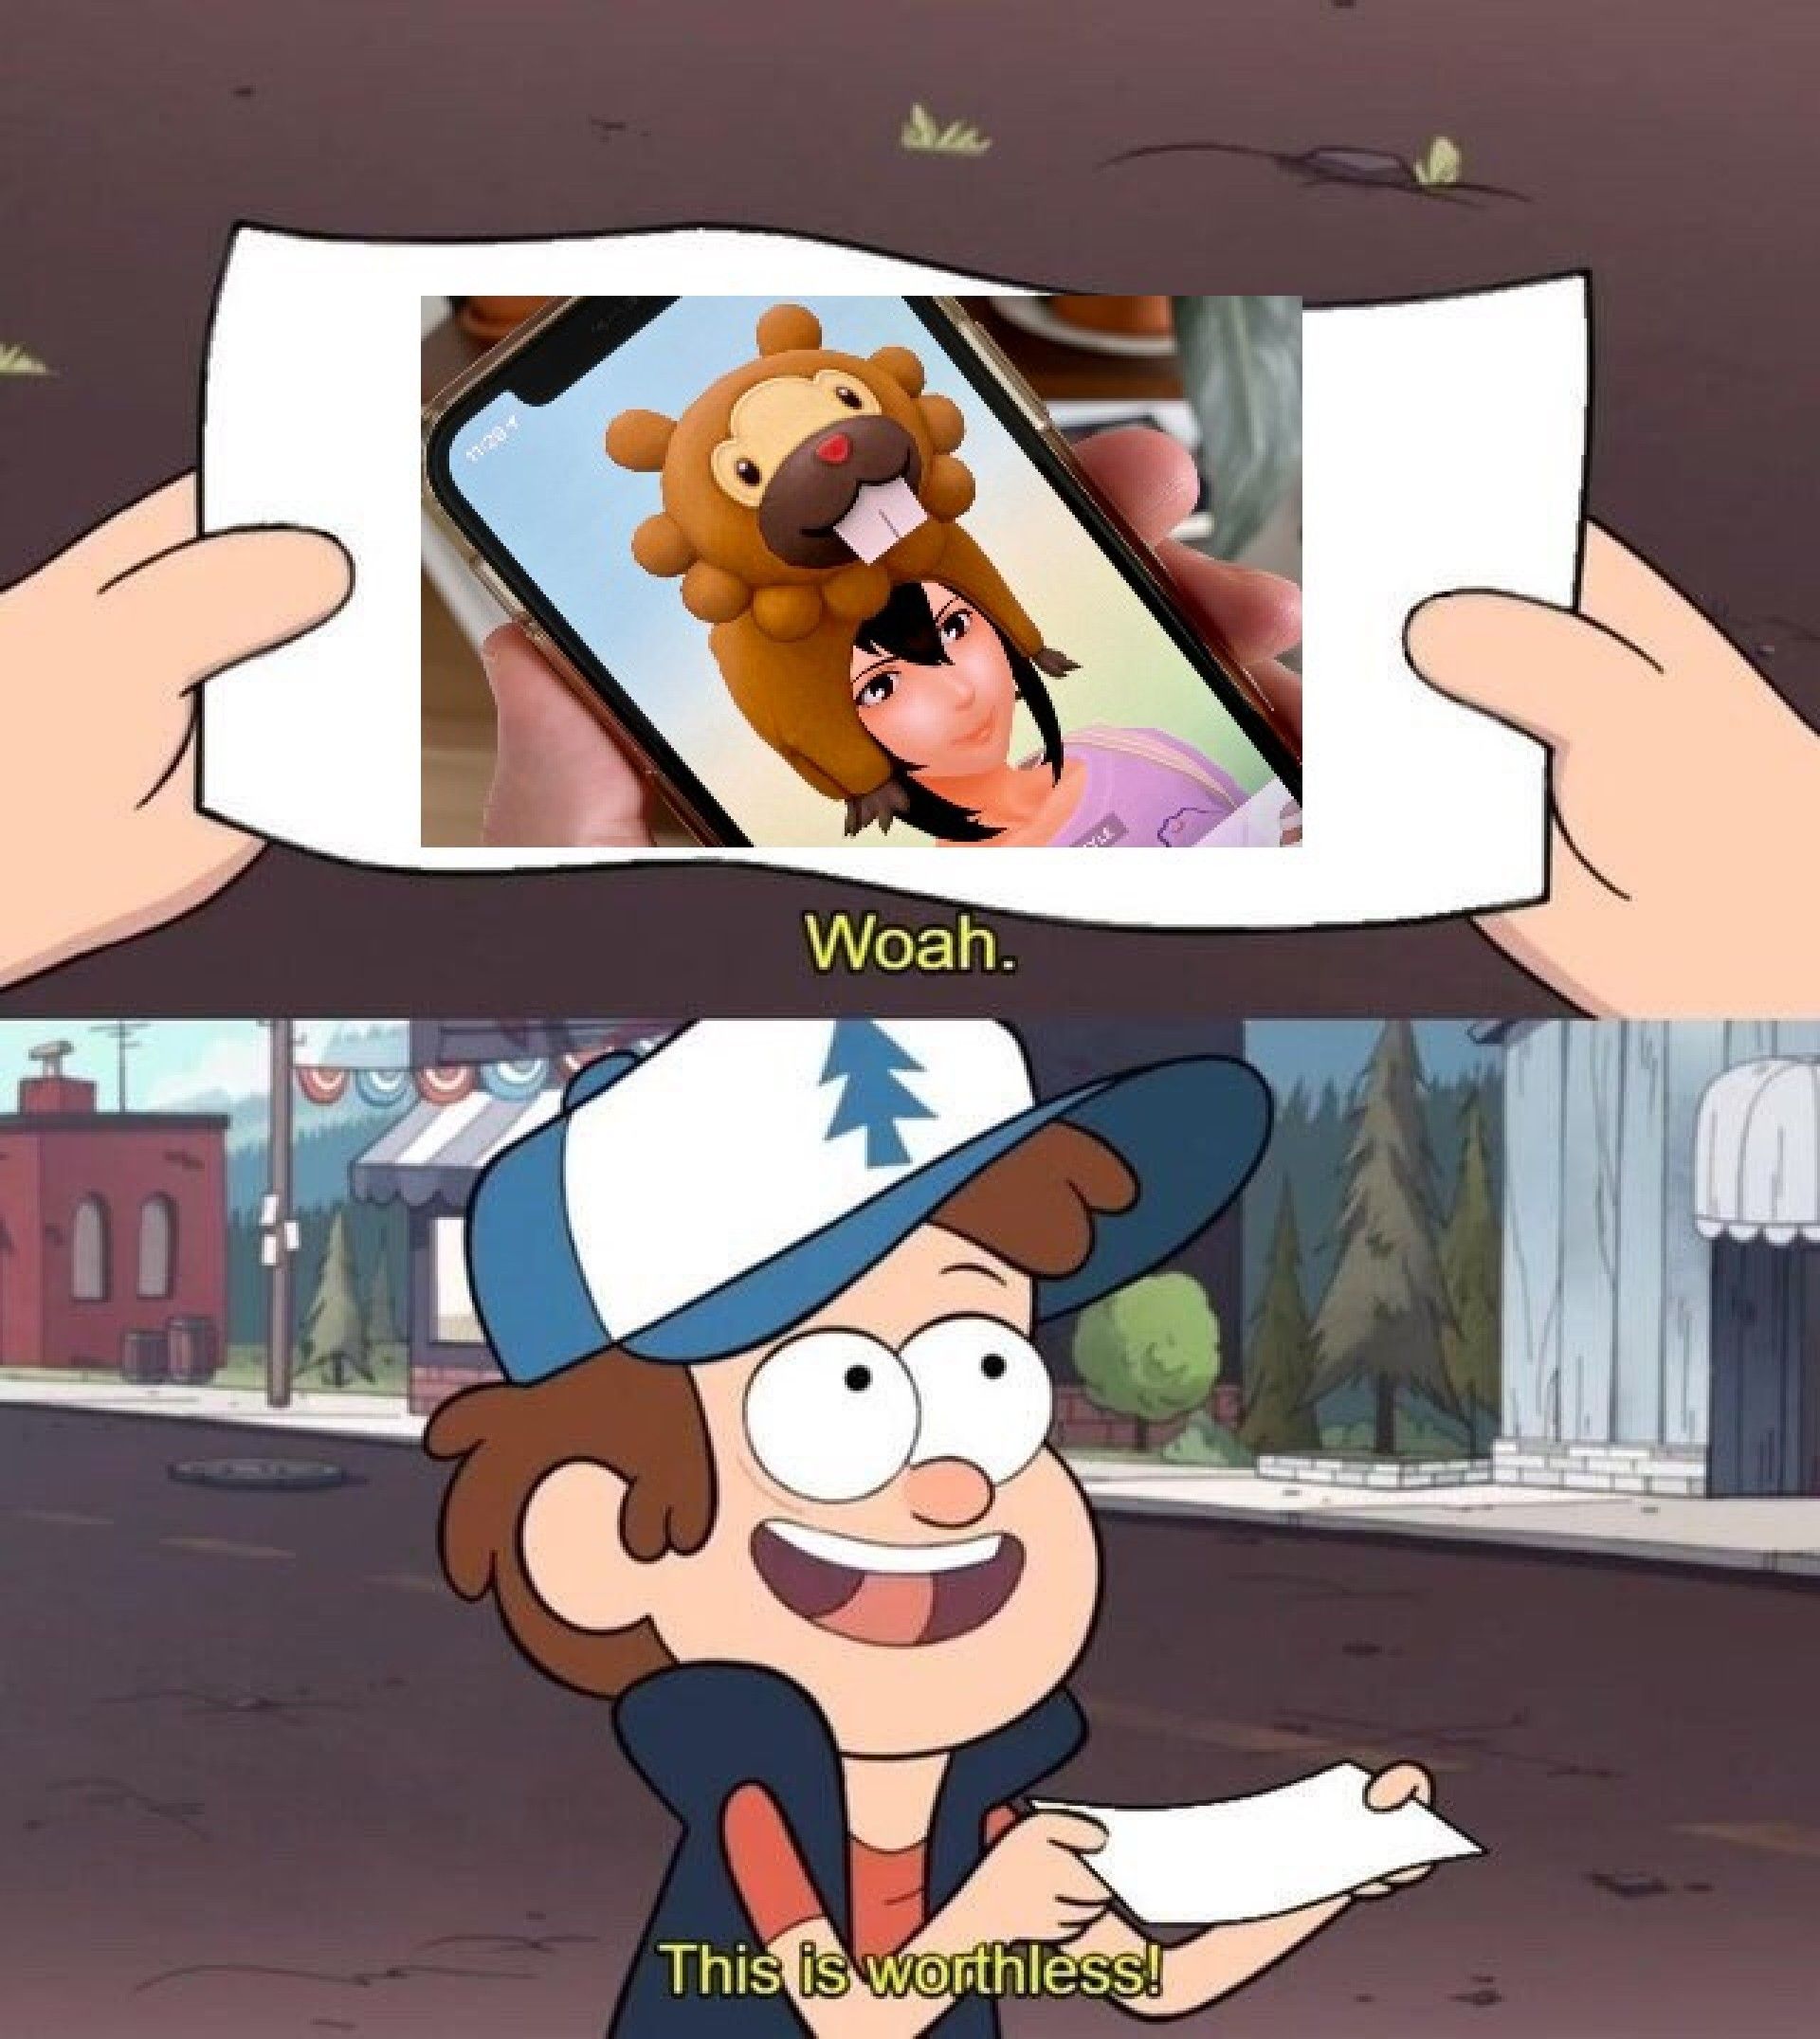 Gravity Falls "this is worthless" meme about Bidoof hat.